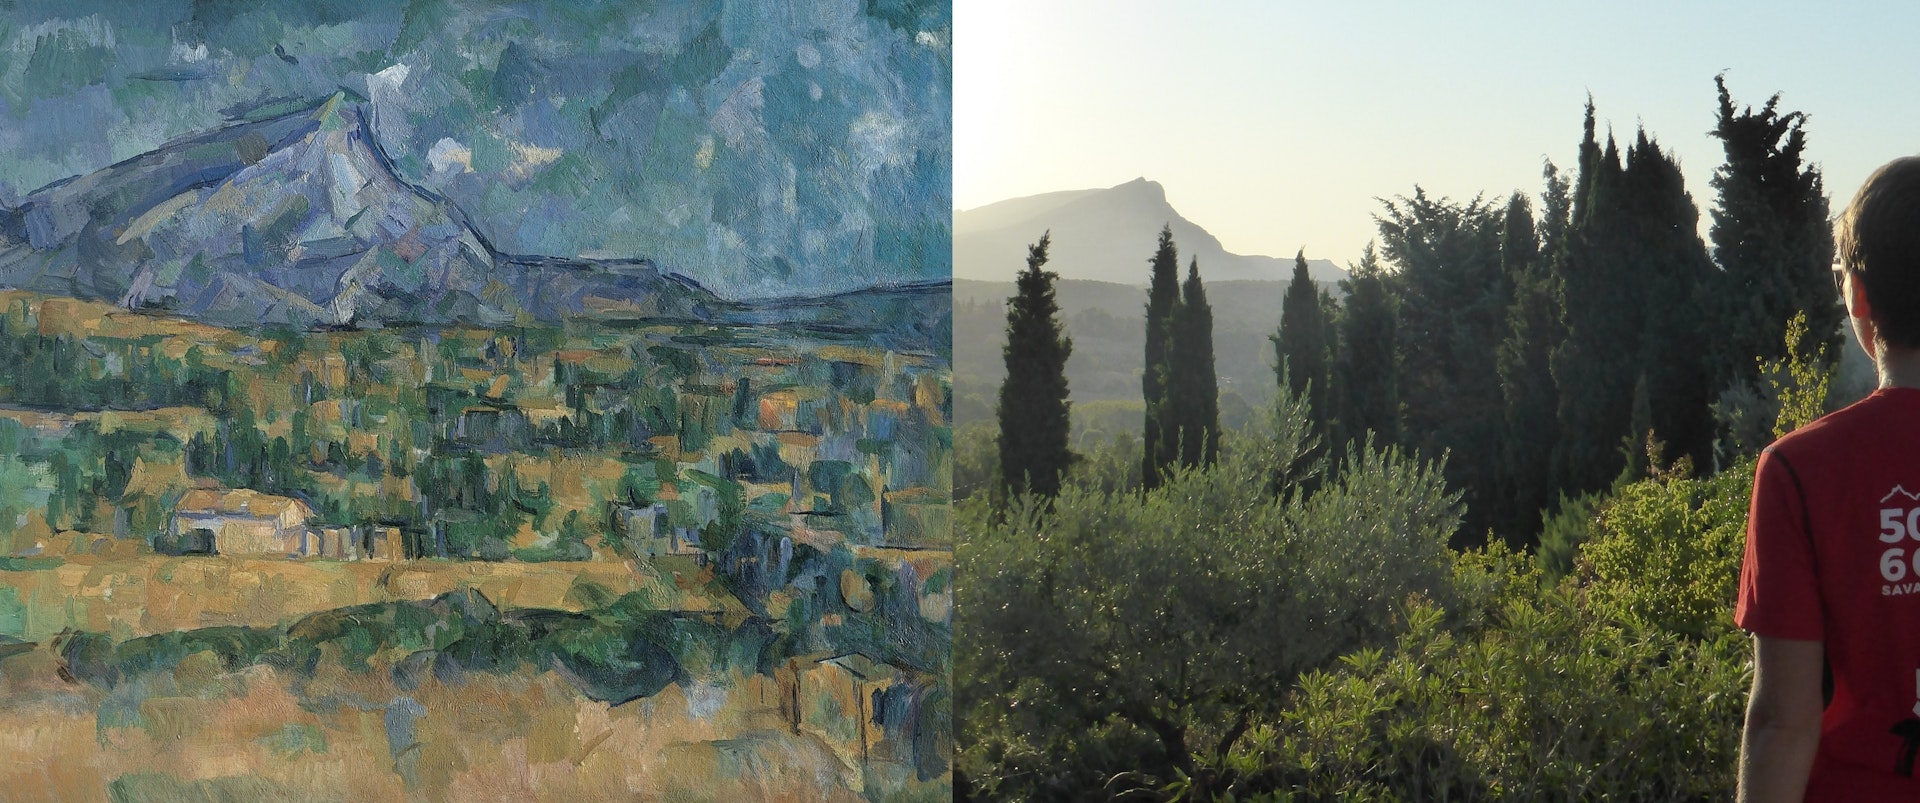 A painting of Mont Sainte Victoire by Paul Cézanne; the pyramid-like mountain rises in the top left-hand corner, with tree covered hills in the foreground. On the right is a photograph of a similar view, with the writer standing in the far right side.